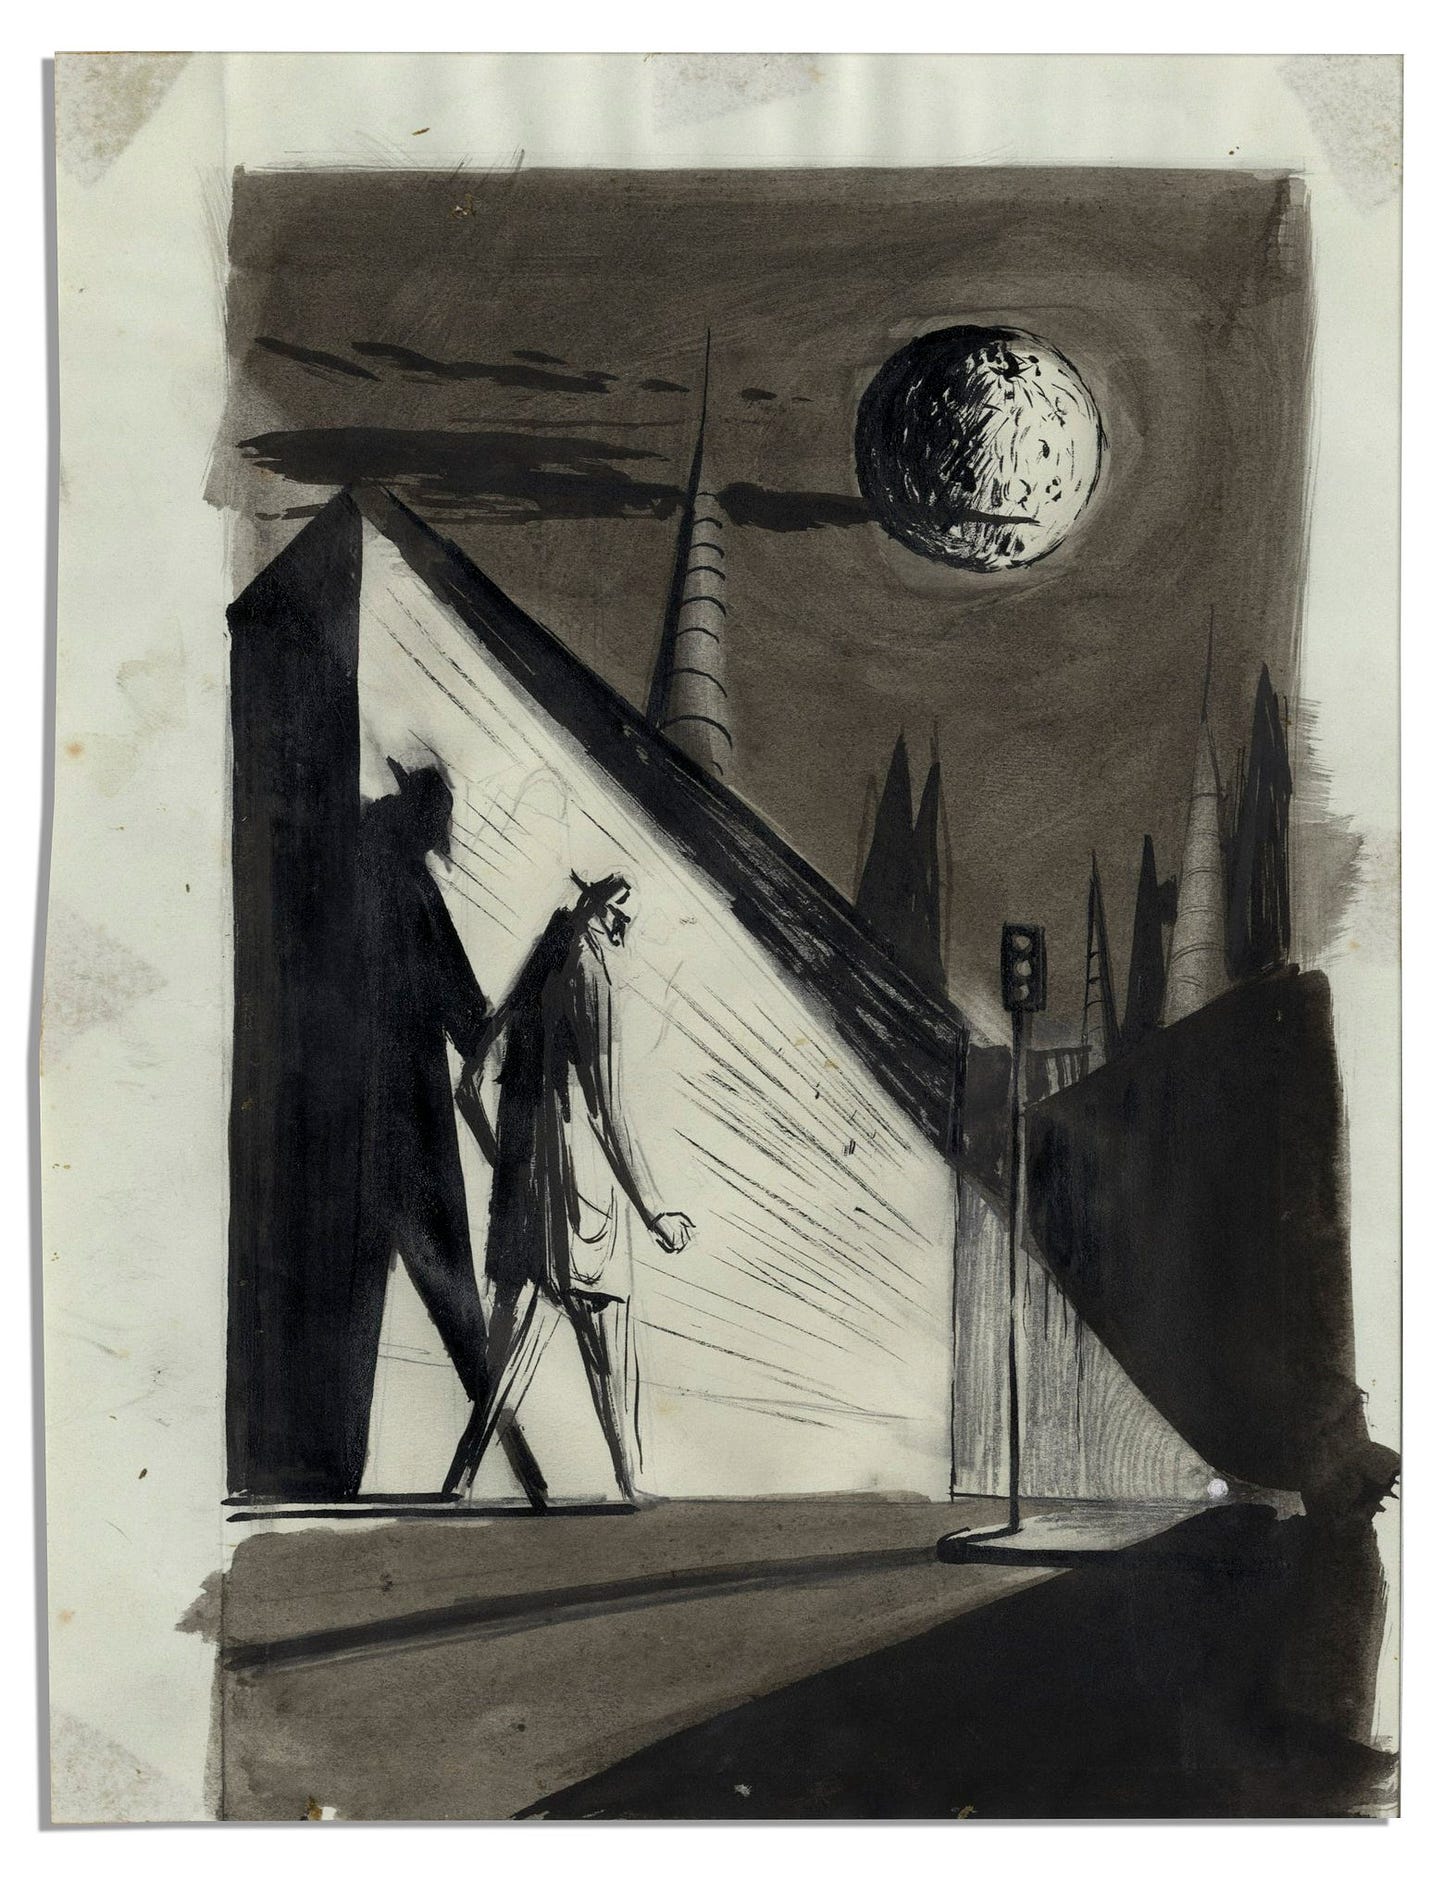 Drawing of a man walking on a shadowy street under the moon